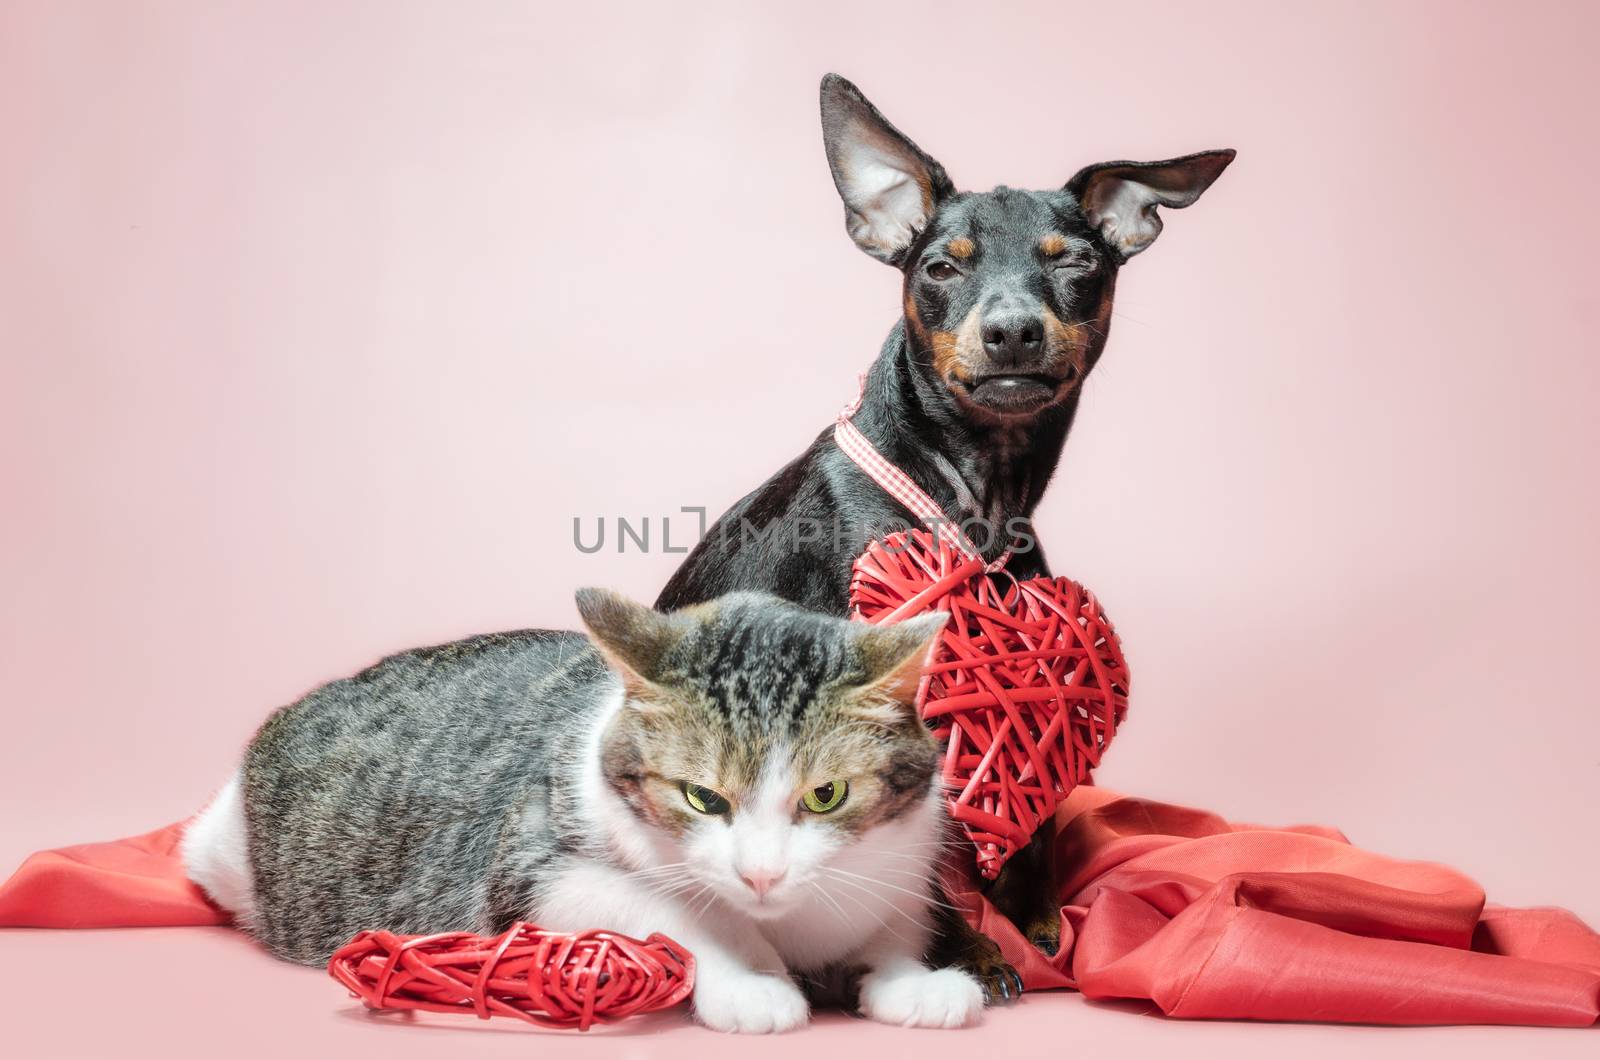 cunning miniature pinscher puppy and gray cat with valentines da by Gera8th